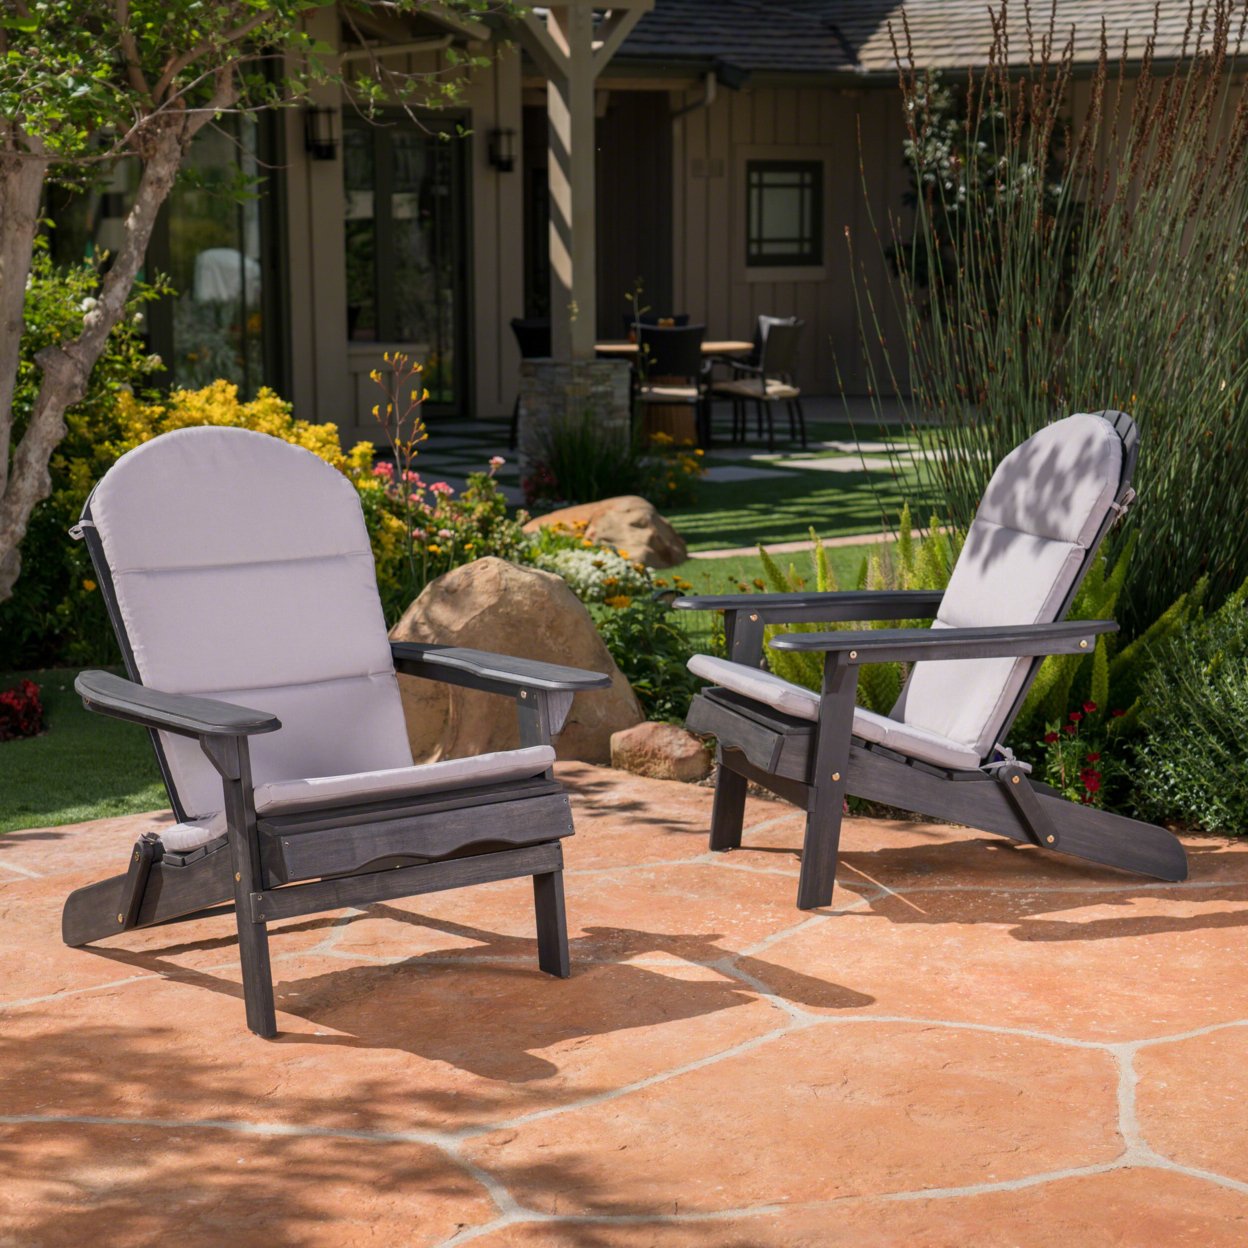 Nelie Outdoor Acacia Wood Adirondack Chairs With Cushions - Grey, Set Of 2